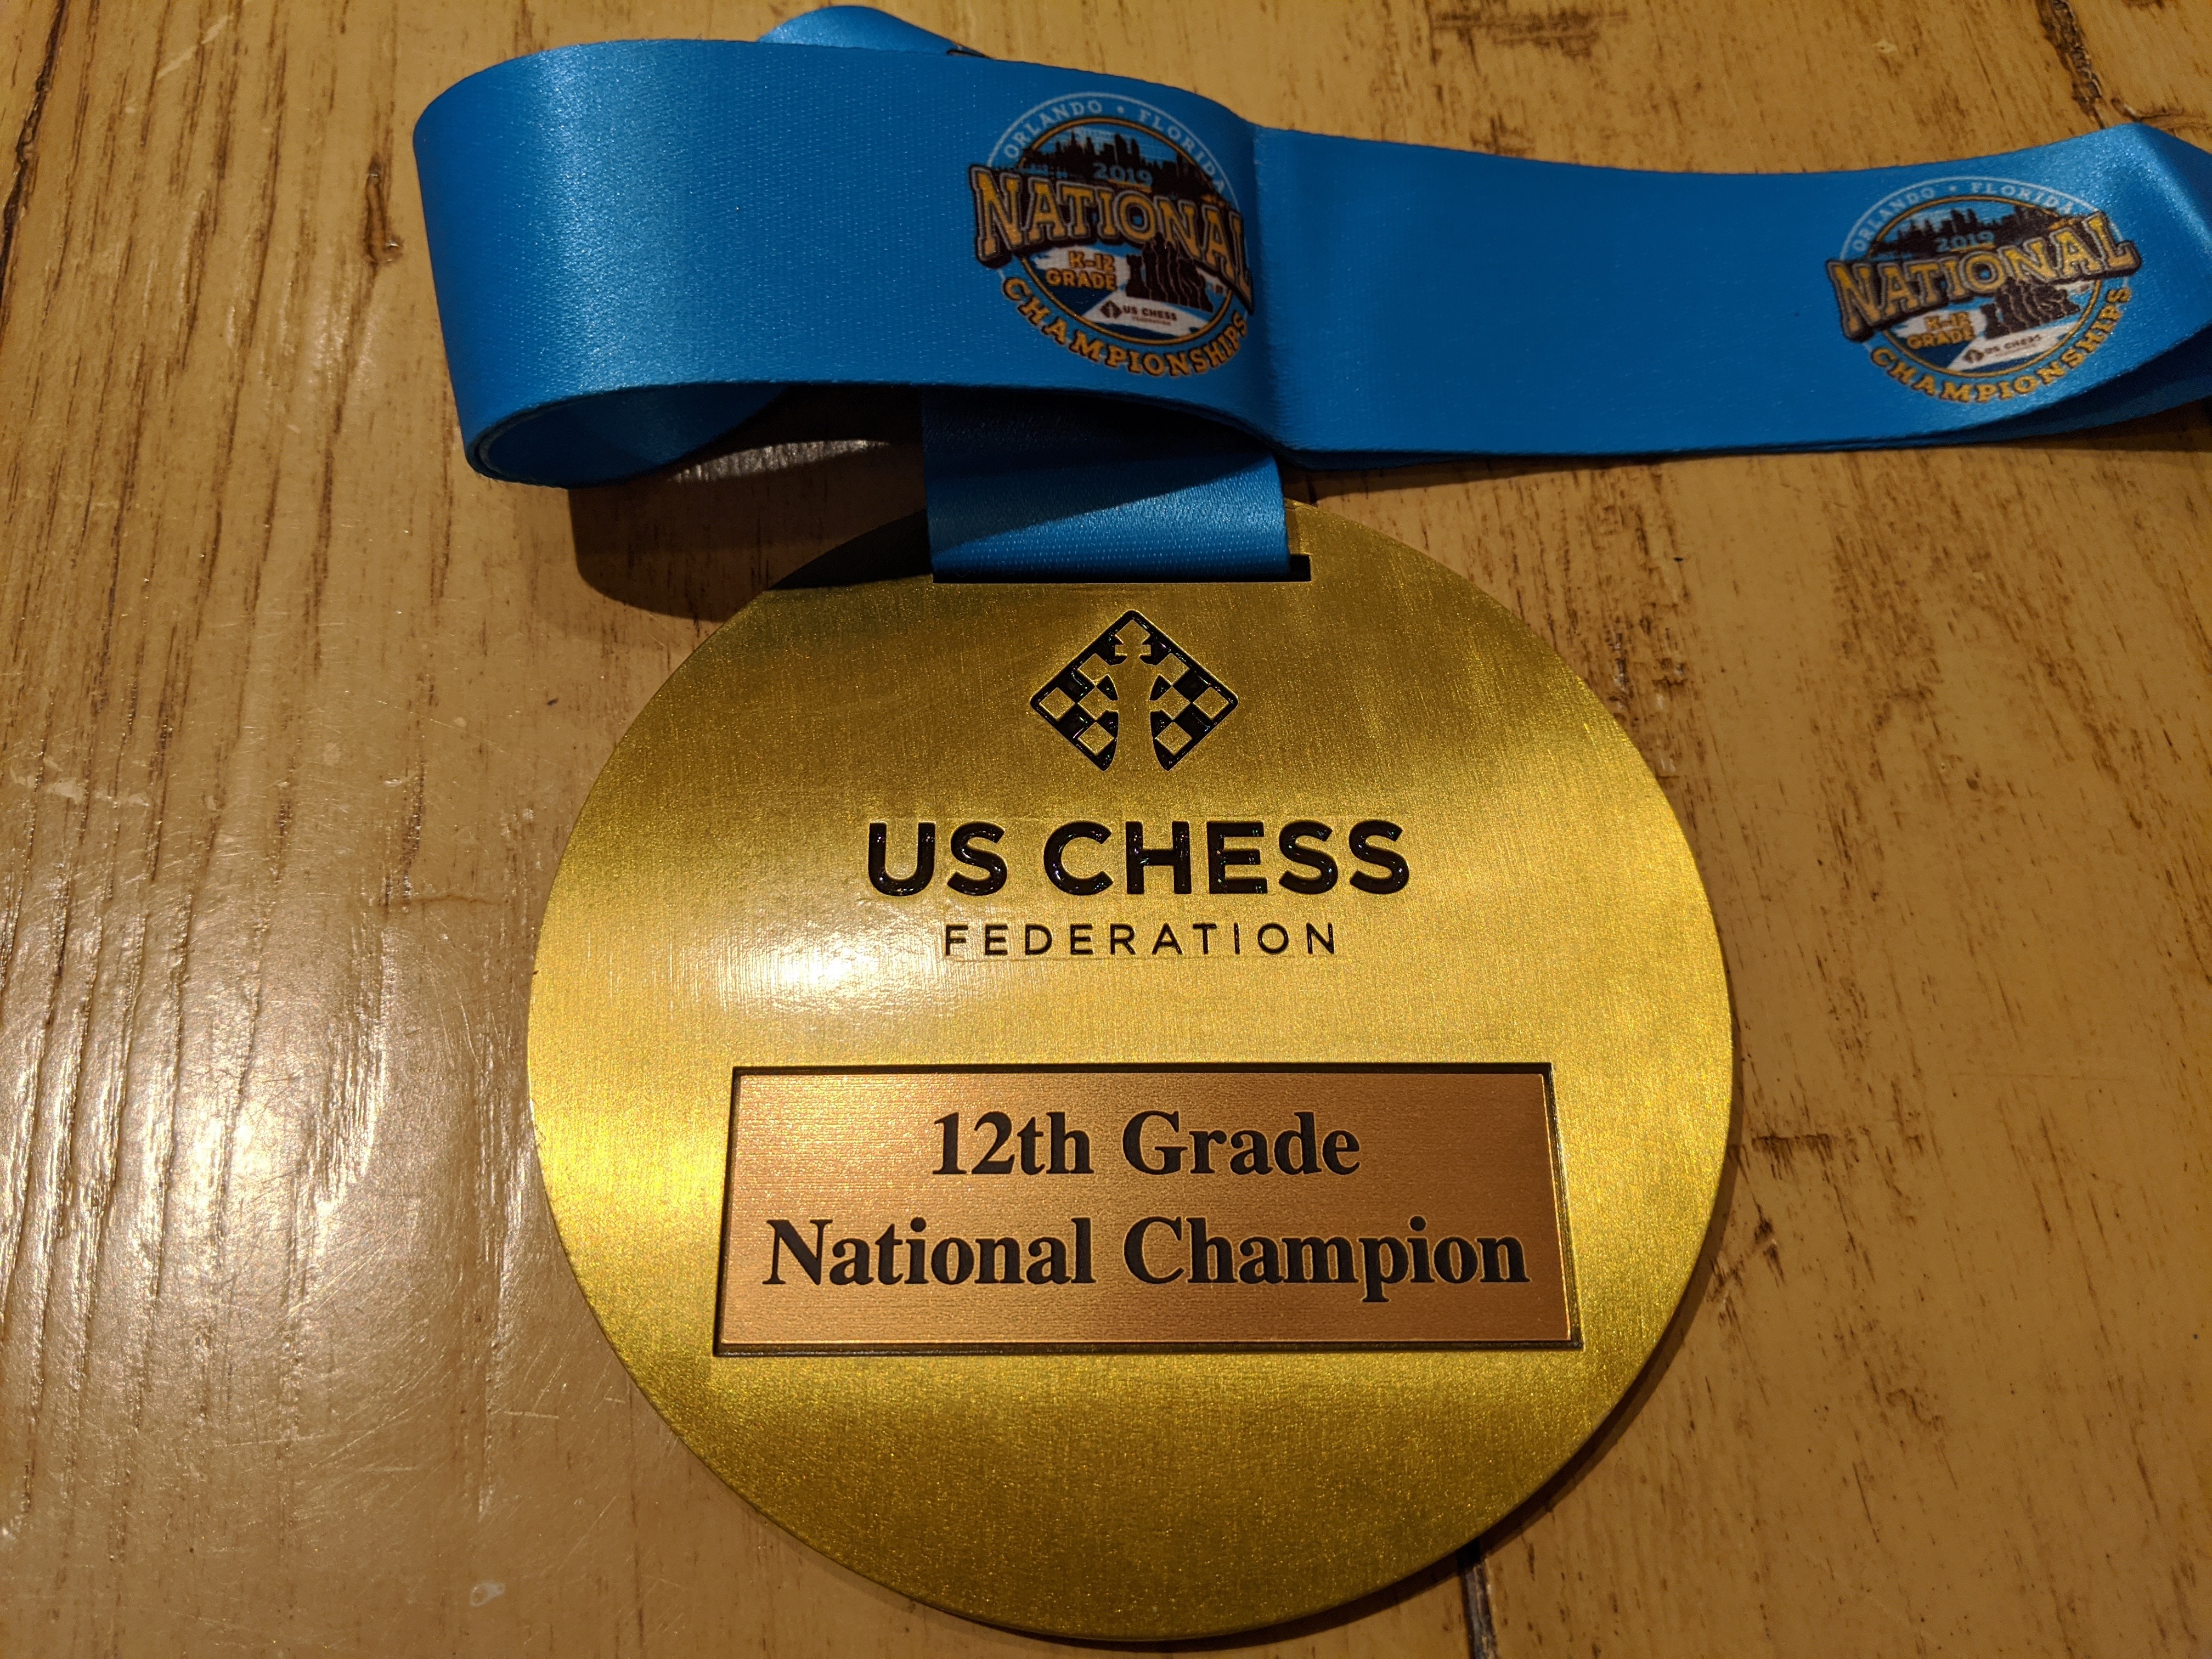 Express Medals Chess Championship Champ Chain Trophy Award with a Center Plaque Plate Measuring 6 by 5.25 Inches and Includes a 34 Inch Chain with Black Velvet Presentation Bag.